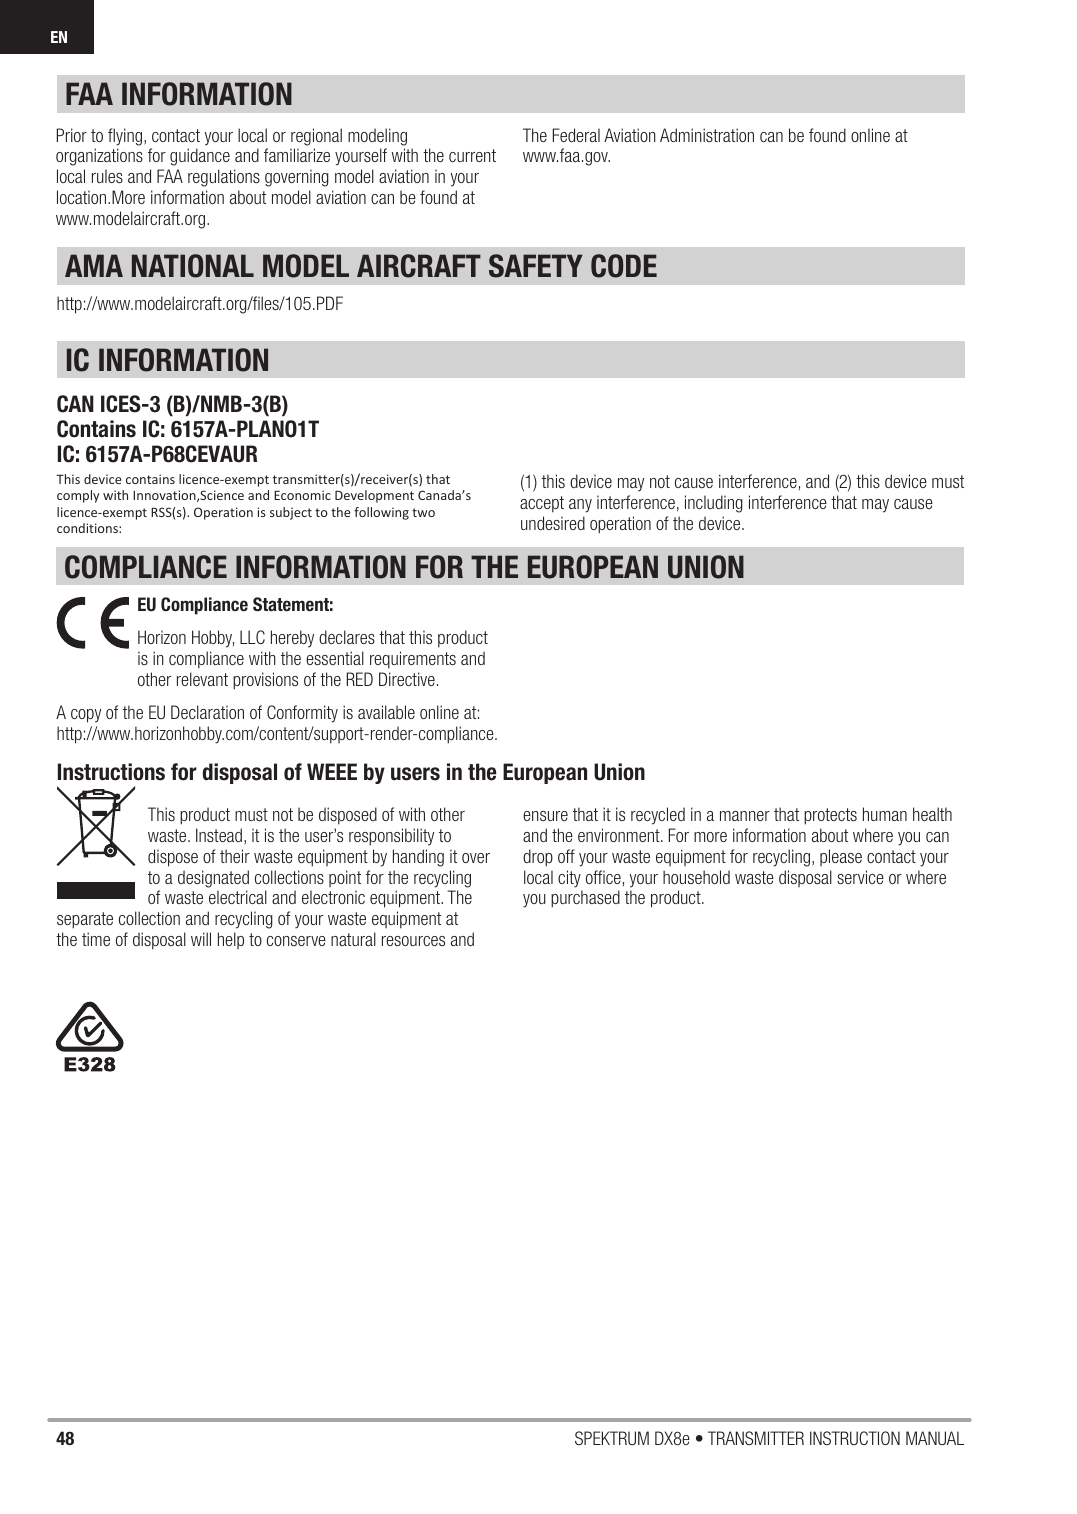 48 SPEKTRUM DX8e • TRANSMITTER INSTRUCTION MANUALENCOMPLIANCE INFORMATION FOR THE EUROPEAN UNION(1) this device may not cause interference, and (2) this device mustaccept any interference, including interference that may causeundesired operation of the device.IC INFORMATIONCAN ICES-3 (B)/NMB-3(B)Contains IC: 6157A-PLANO1TIC: 6157A-P68CEVAURThis device contains licence-exempt transmitter(s)/receiver(s) that comply with Innovation,Science and Economic Development Canada’s licence-exempt RSS(s). Operation is subject to the following two conditions:AMA NATIONAL MODEL AIRCRAFT SAFETY CODEhttp://www.modelaircraft.org/ﬁ les/105.PDFFAA INFORMATIONPrior to ﬂ ying, contact your local or regional modeling organizations for guidance and familiarize yourself with the current local rules and FAA regulations governing model aviation in your location.More information about model aviation can be found atwww.modelaircraft.org.The Federal Aviation Administration can be found online atwww.faa.gov.Instructions for disposal of WEEE by users in the European UnionThis product must not be disposed of with other waste. Instead, it is the user’s responsibility to dispose of their waste equipment by handing it over to a designated collections point for the recycling of waste electrical and electronic equipment. The separate collection and recycling of your waste equipment at the time of disposal will help to conserve natural resources and ensure that it is recycled in a manner that protects human health and the environment. For more information about where you can drop off your waste equipment for recycling, please contact your local city ofﬁ ce, your household waste disposal service or where you purchased the product.EU Compliance Statement: Horizon Hobby, LLC hereby declares that this product is in compliance with the essential requirements and other relevant provisions of the RED Directive. A copy of the EU Declaration of Conformity is available online at:http://www.horizonhobby.com/content/support-render-compliance.